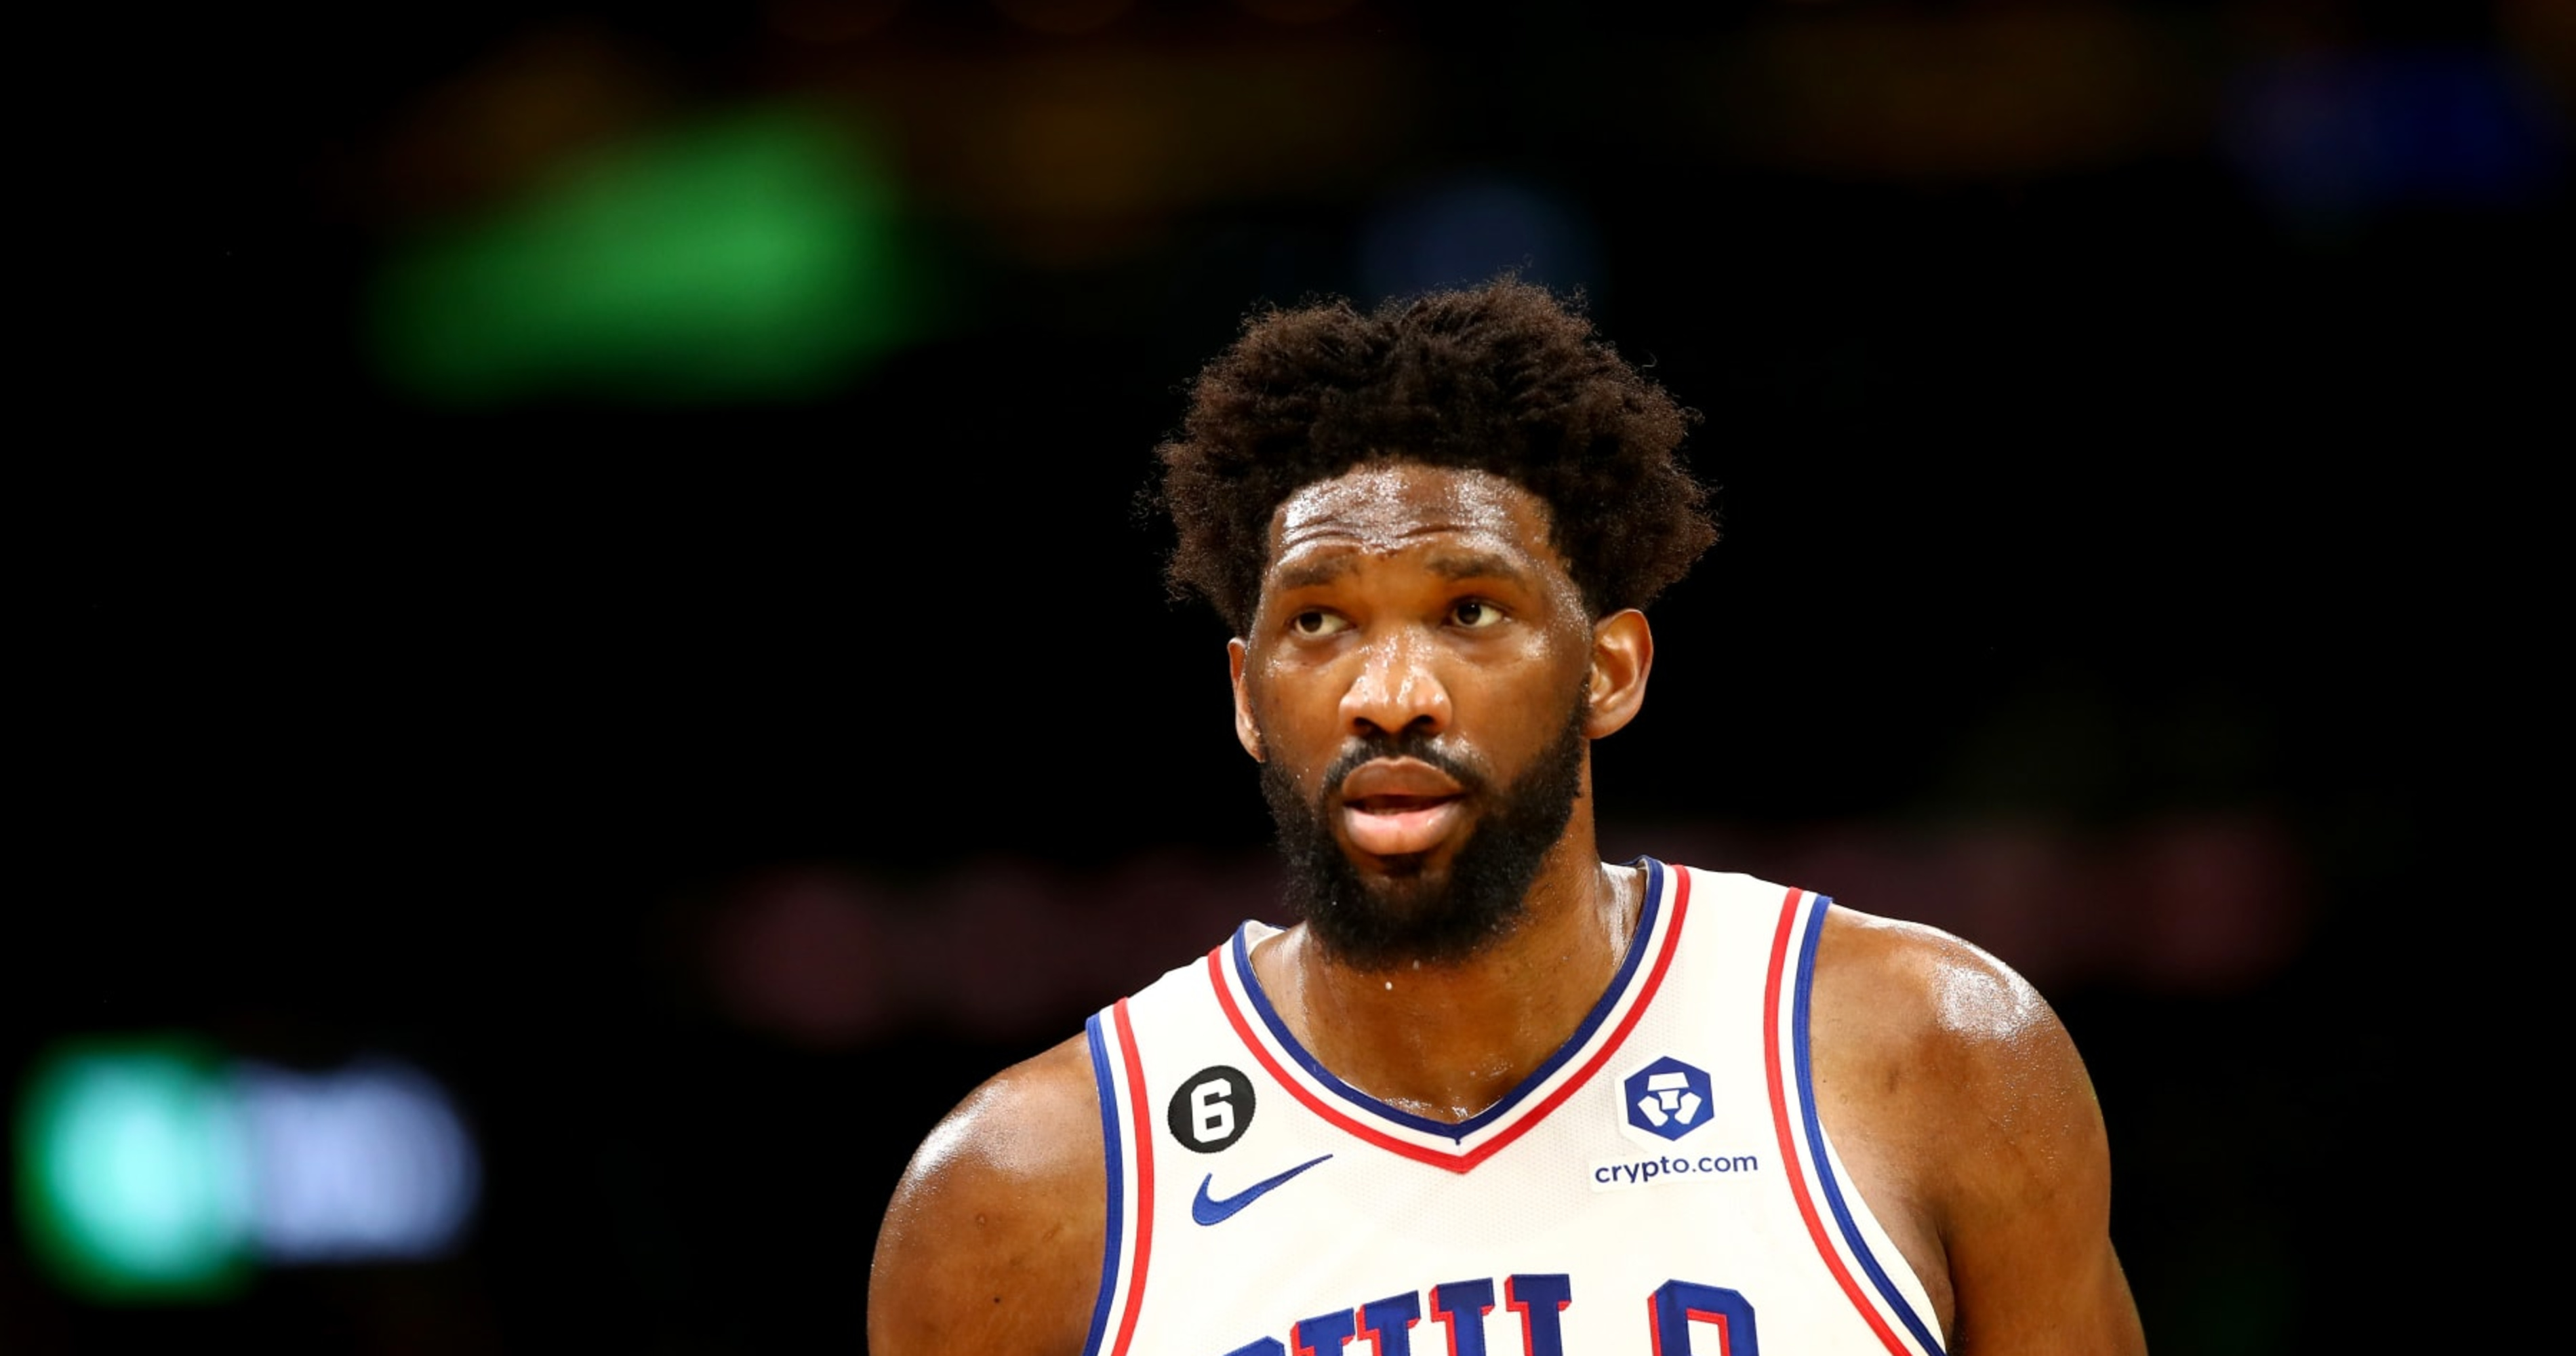 Kansas' Embiid to miss next two games, possible for postseason